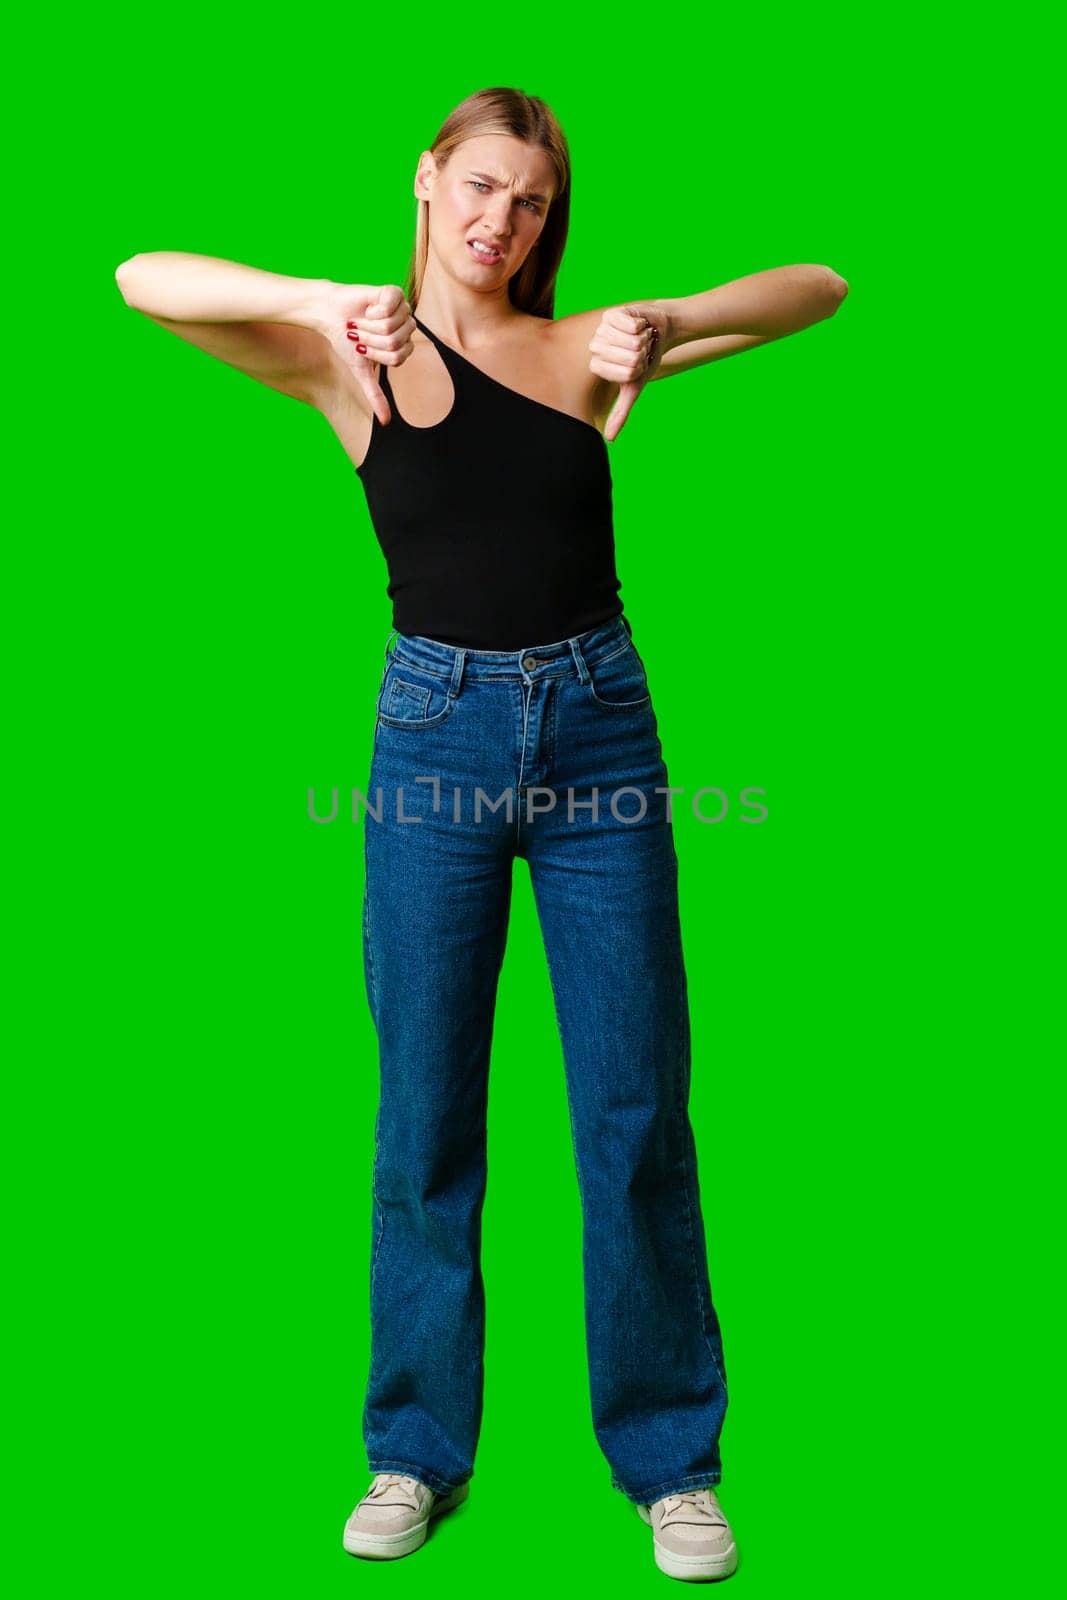 Young Woman Expressing Disapproval With a Thumbs Down Gesture Against a Green Background in studio